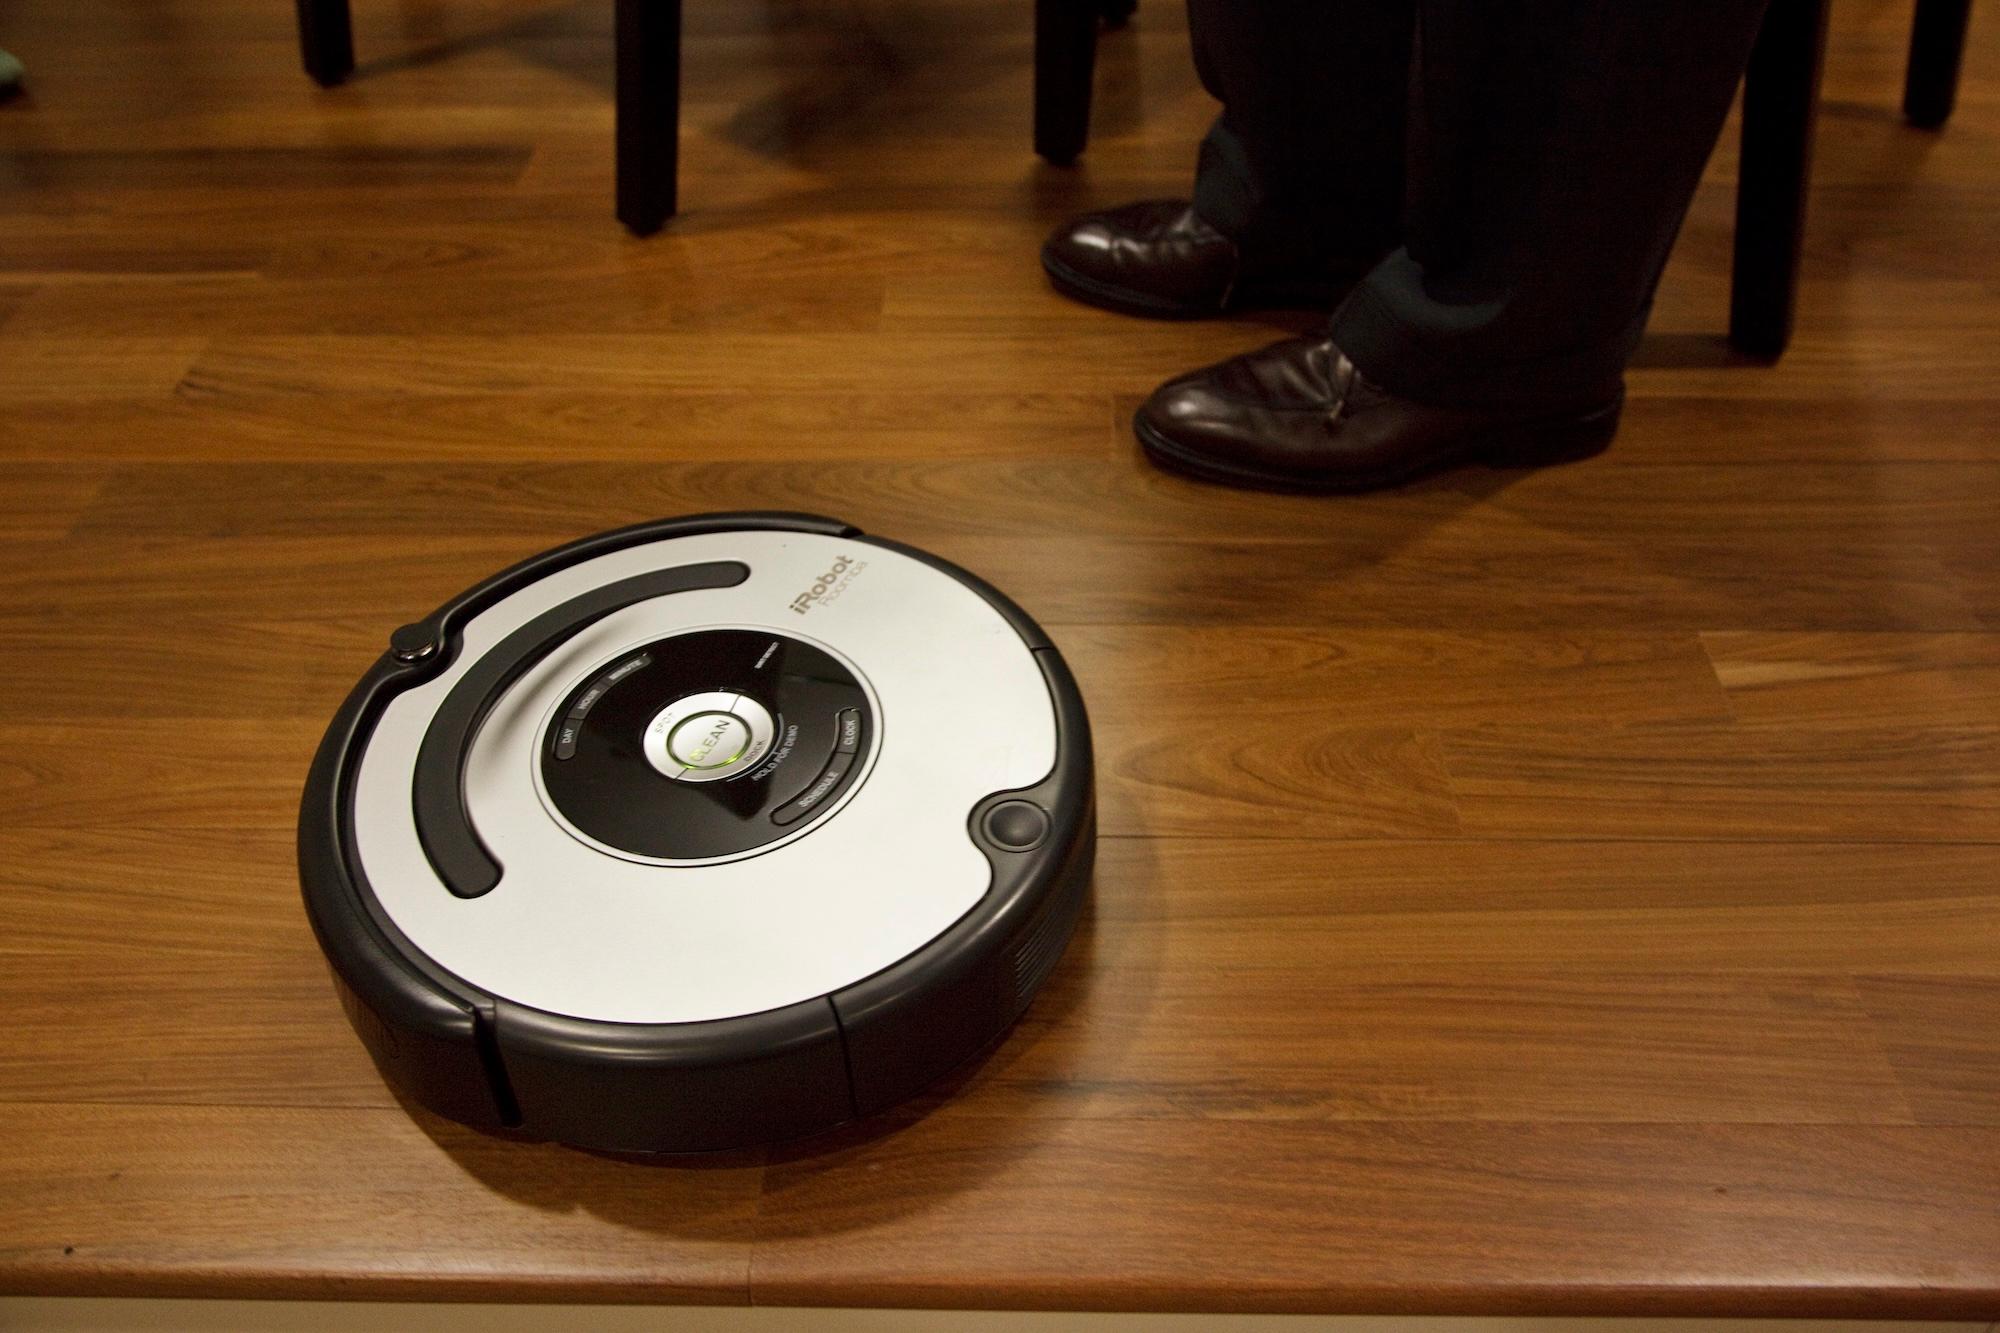 Roomba vacuum cleaner at the headquarters of iRobot in Bedford, Massachusetts.